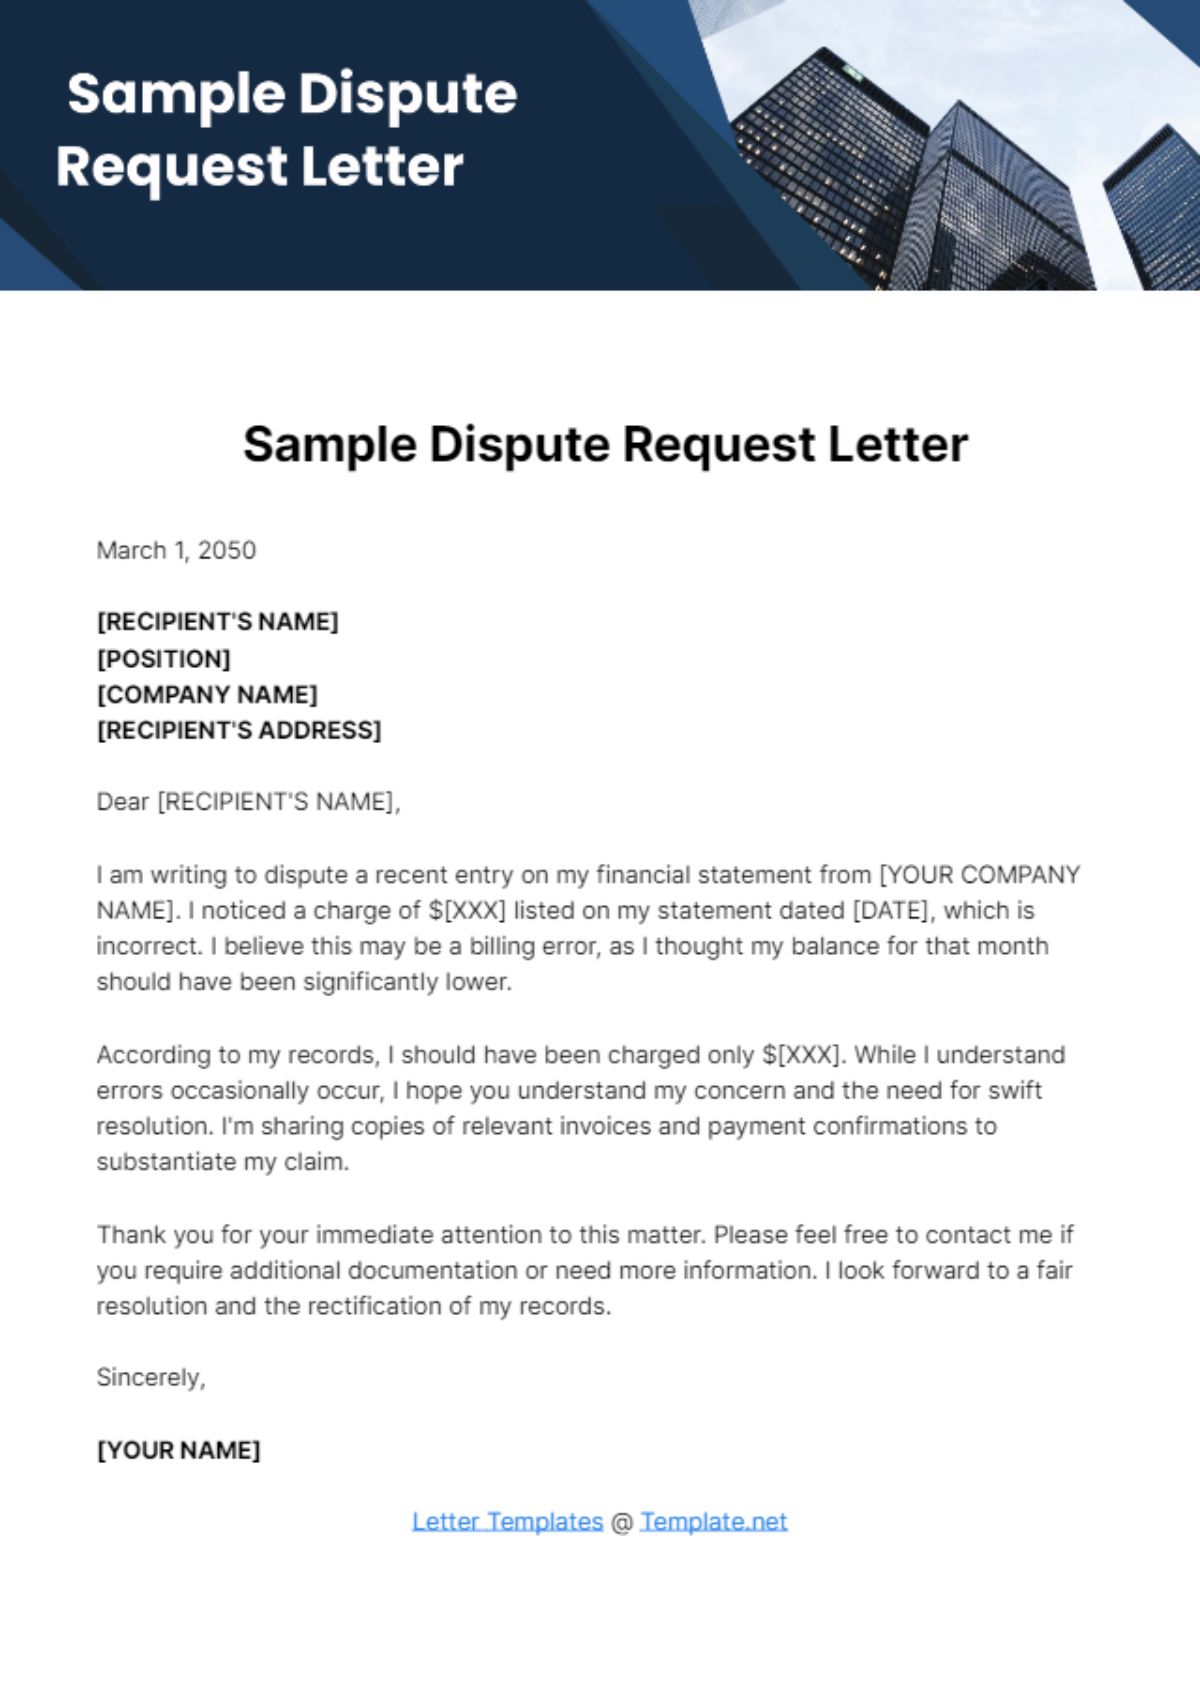 Free Sample Dispute Request Letter Template